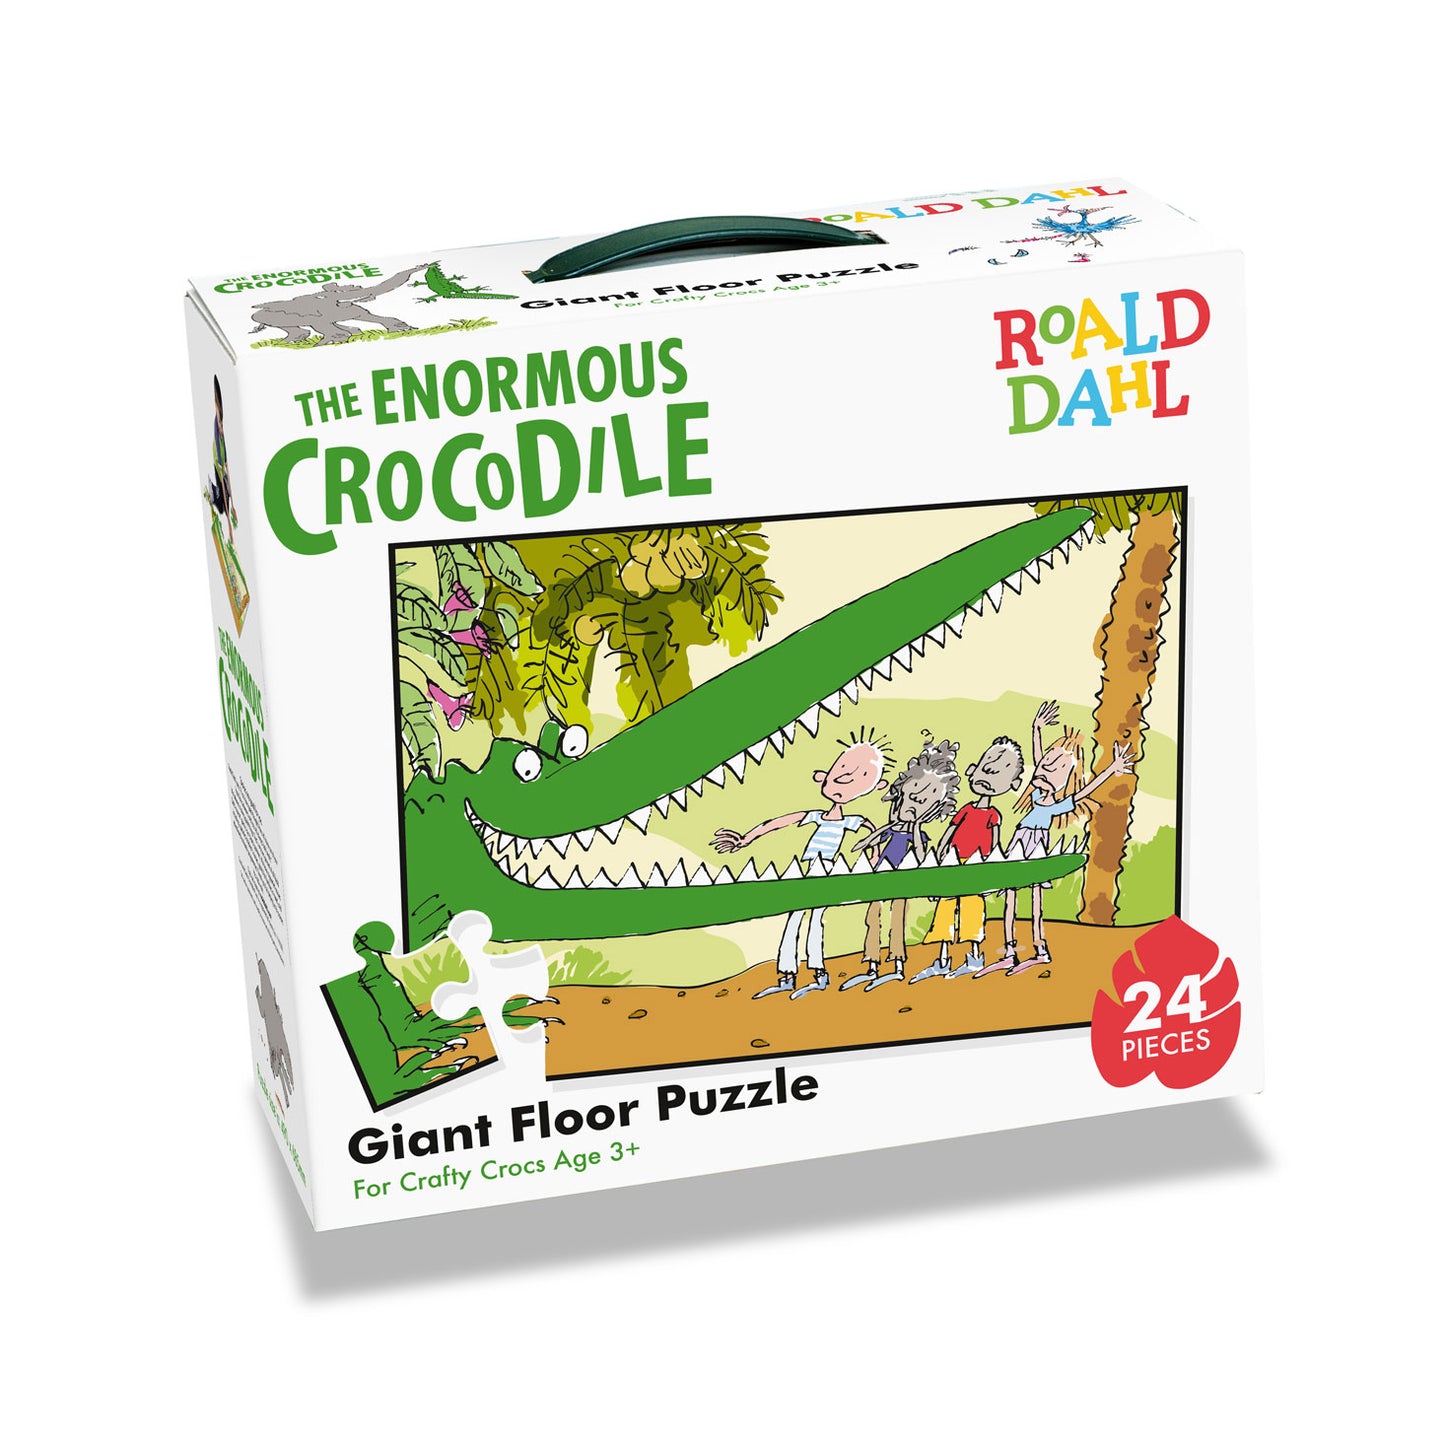 The Enormous Crocodile Giant Floor Puzzle from Roald Dahl and Quentin Blake